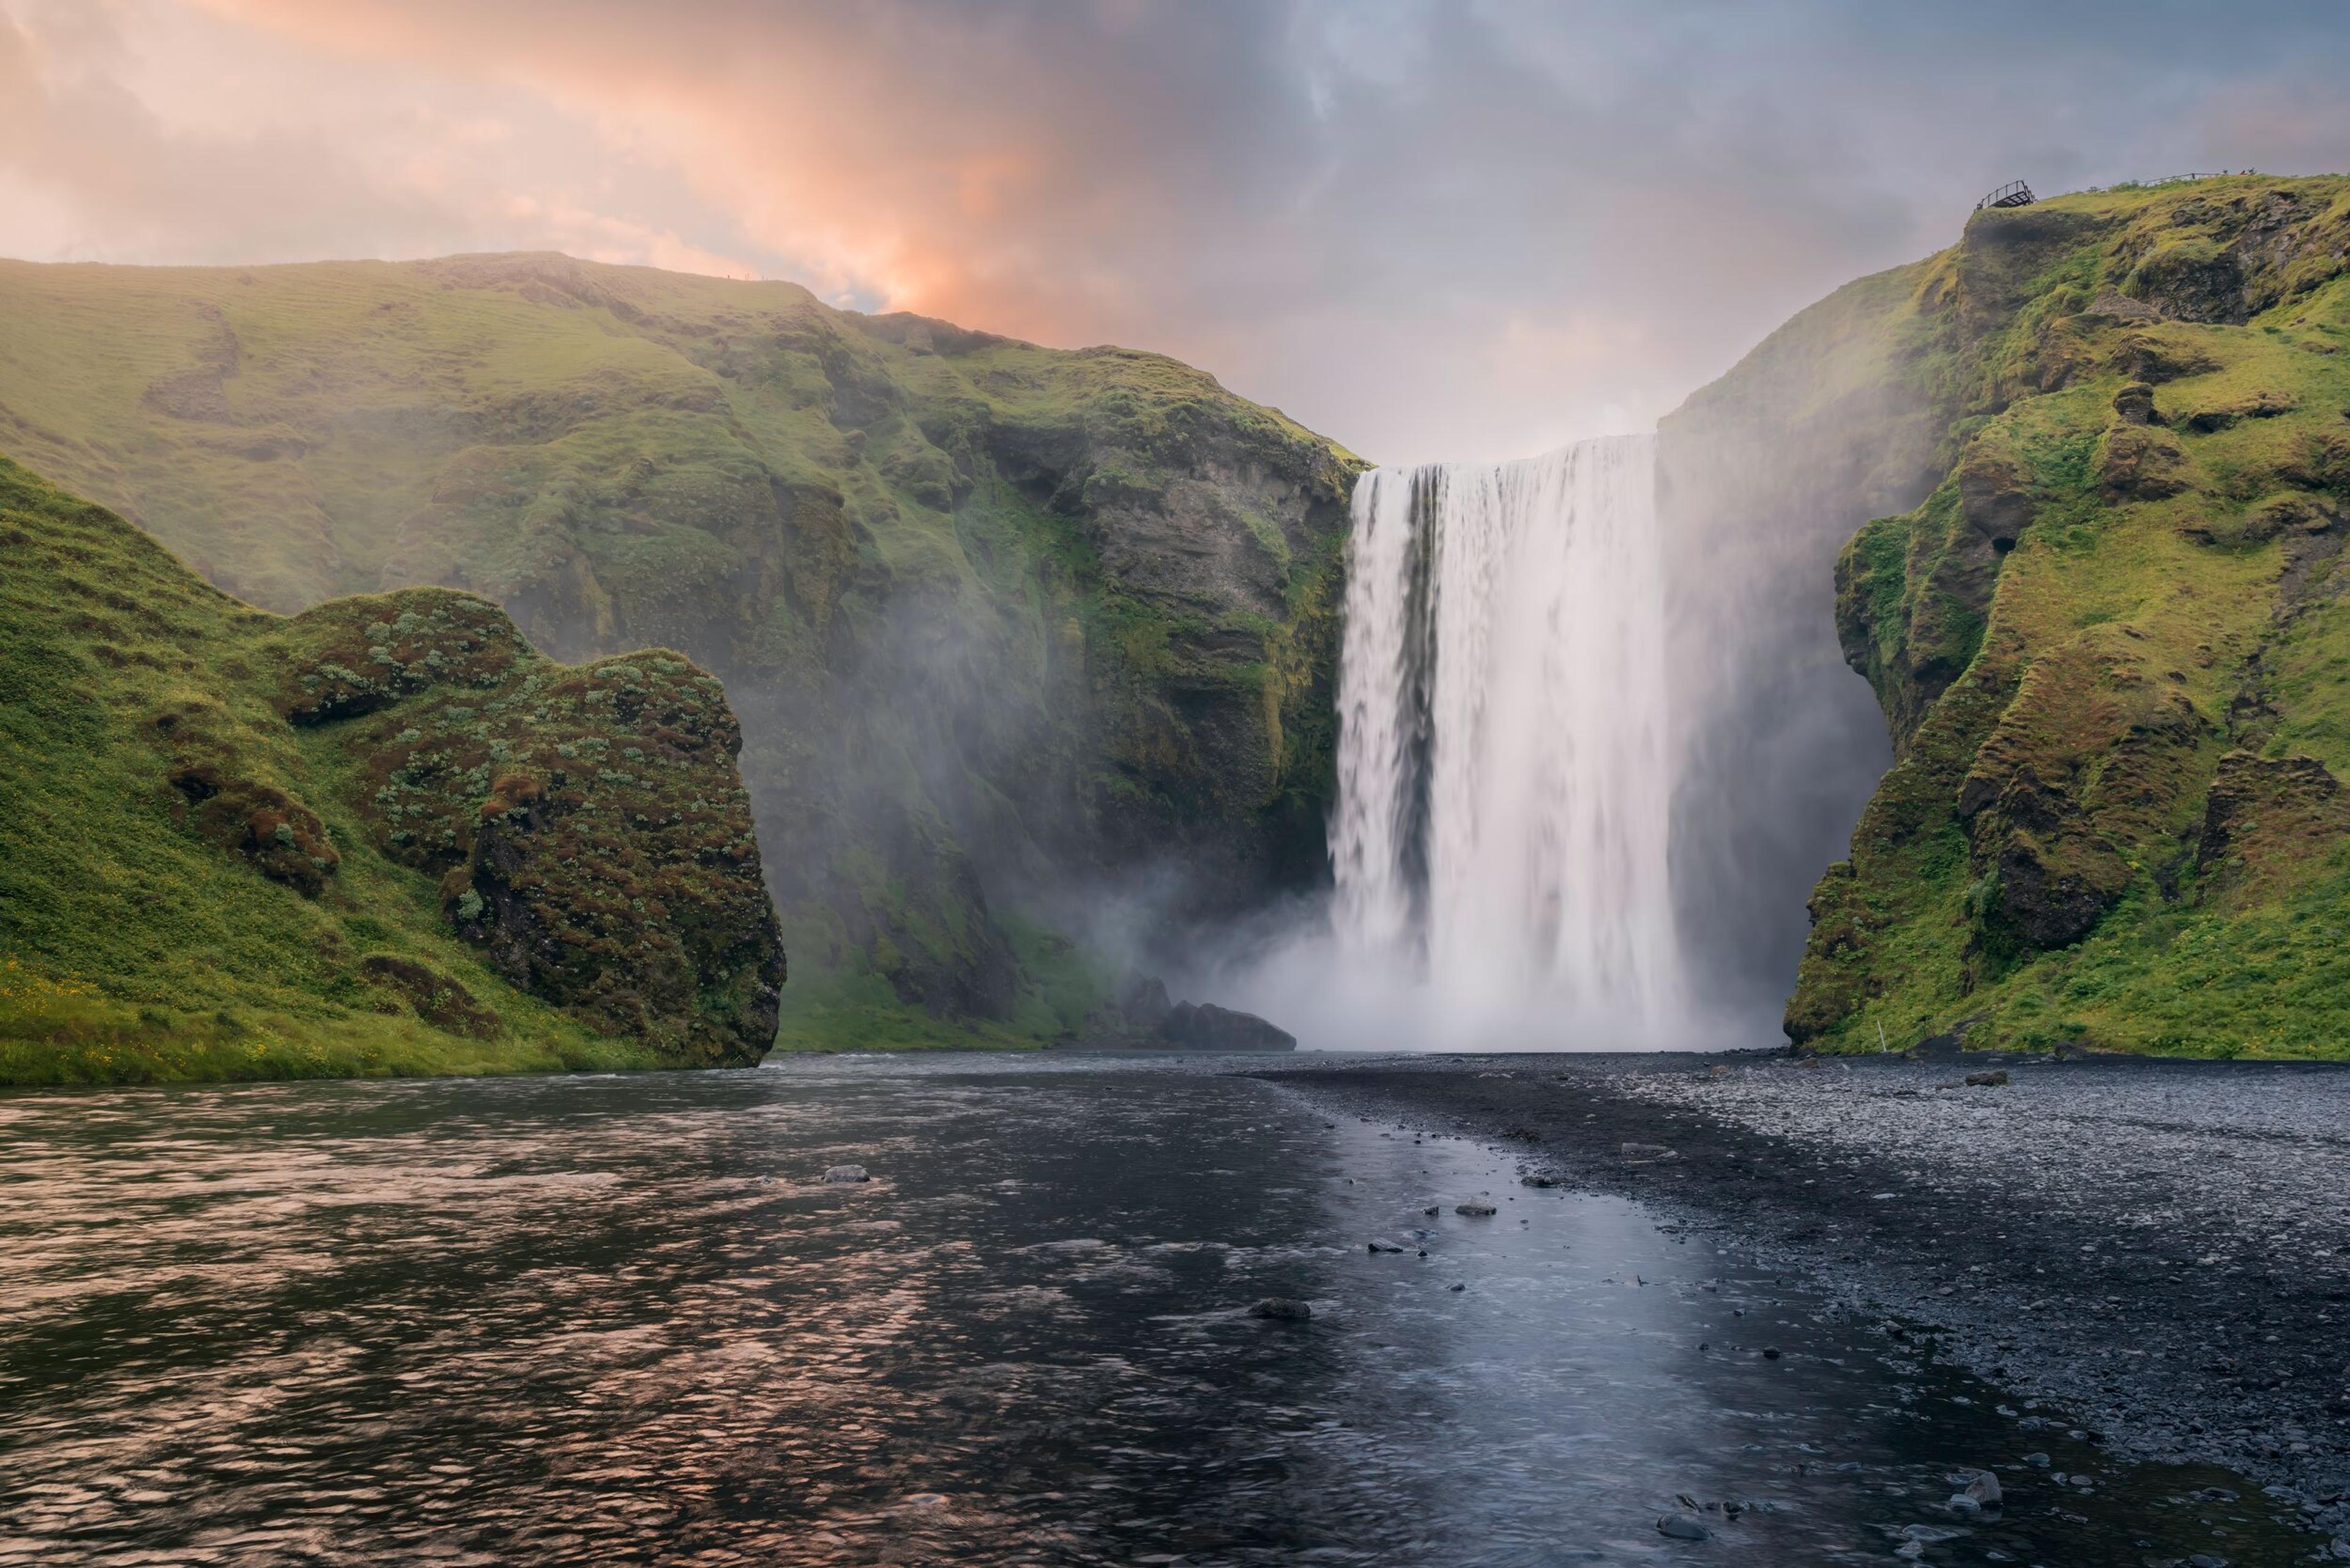 Skógafoss Waterfall in the south coast of Iceland.